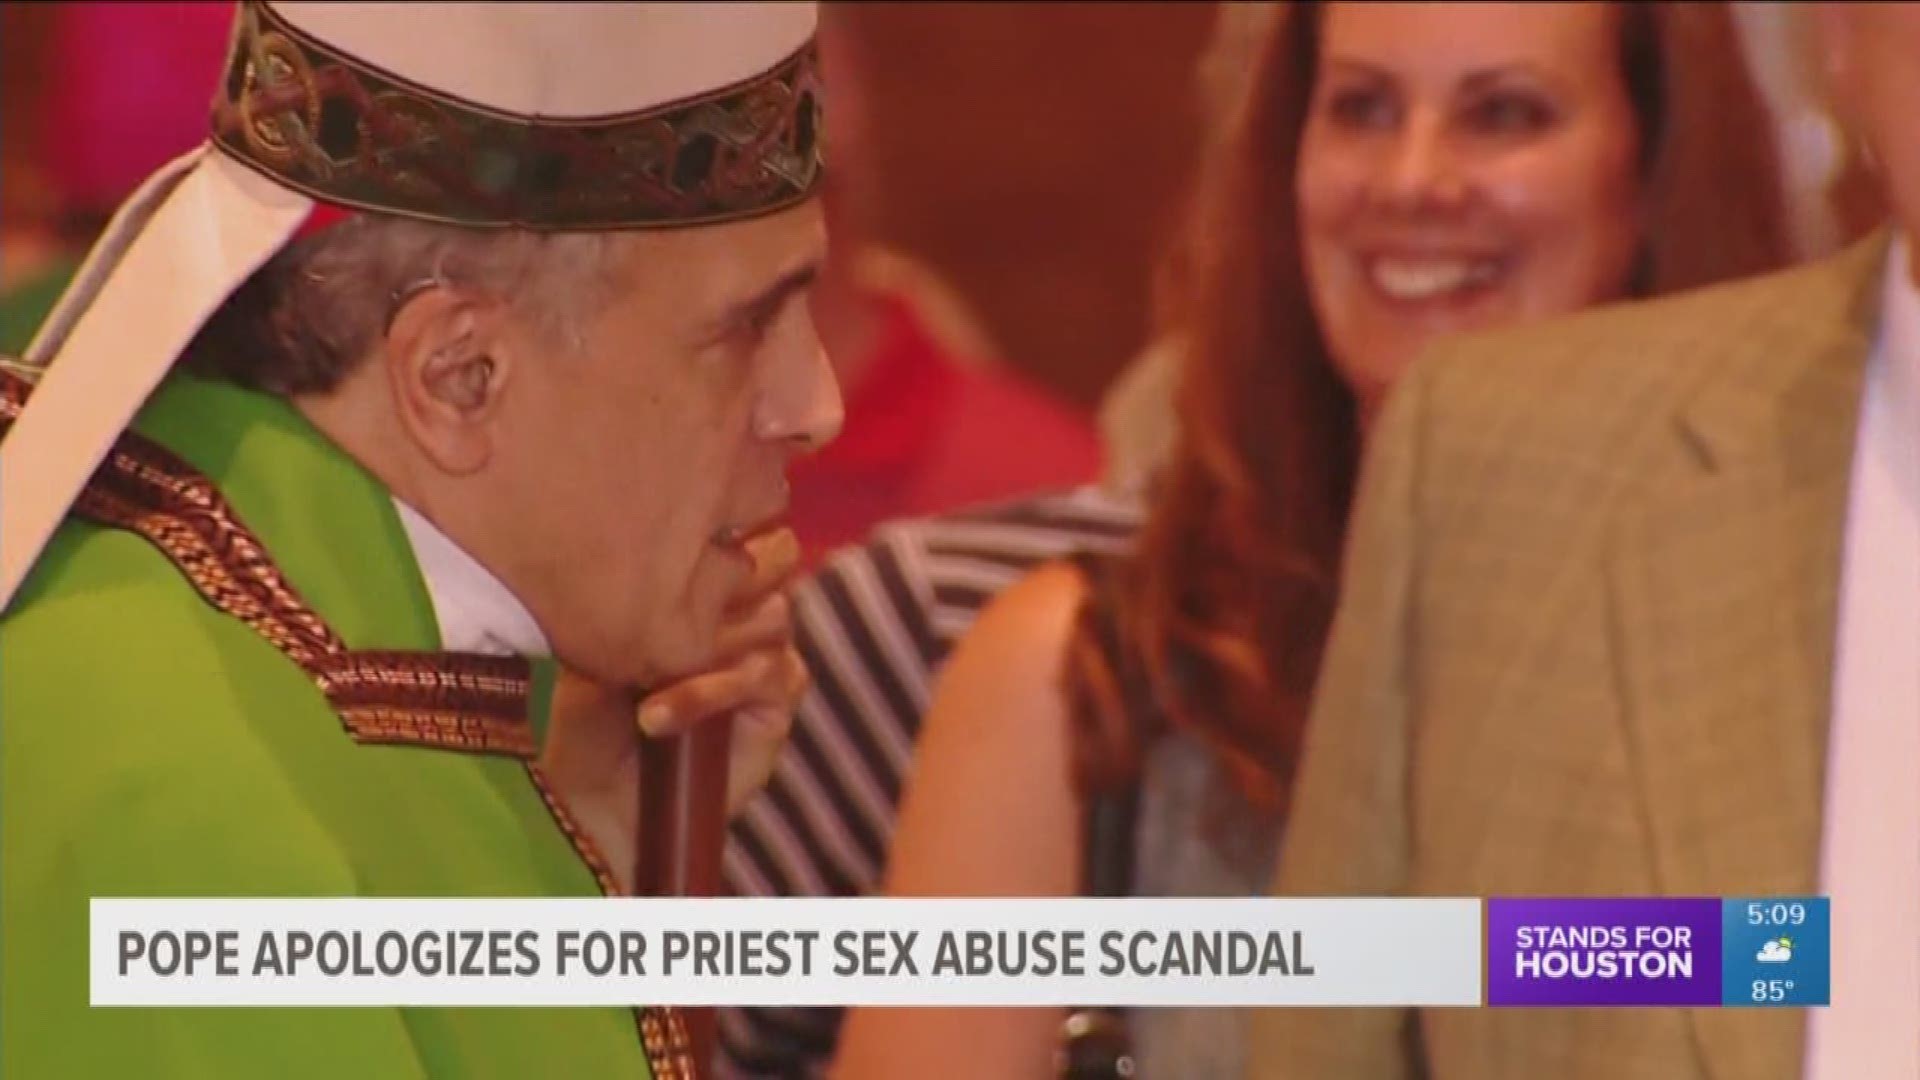 Cardinal Daniel DiNardo, the President of the US Conference of Catholic Bishops spoke out on Monday about Pope Francis' letter on the most recent sexual abuse scandal.